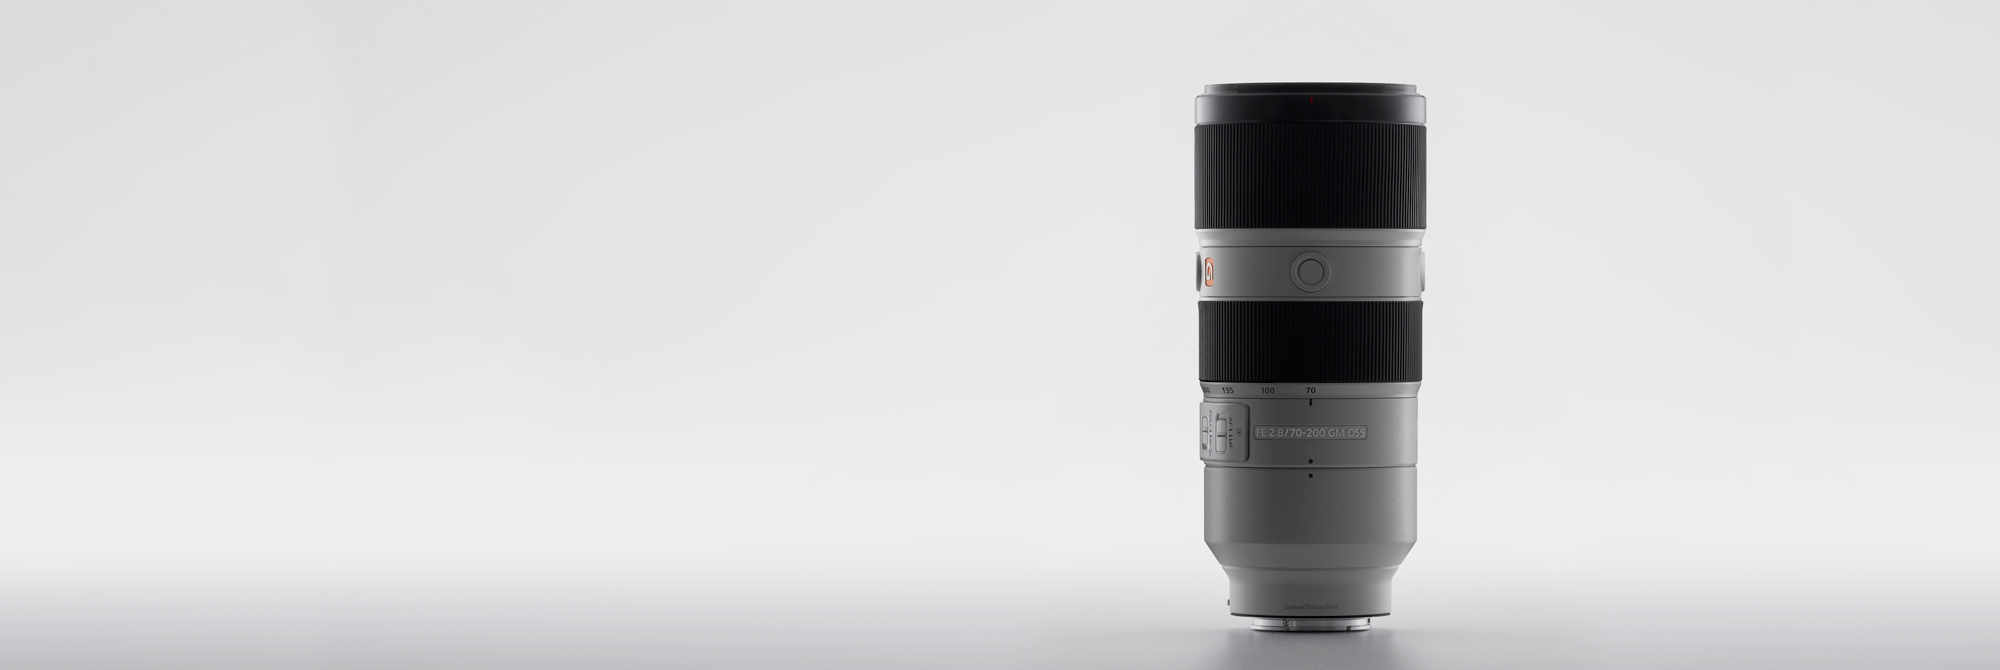 G MASTER FE 70-200mm F2.8 GM OSS Commentary of Engineers - FE 70-200mm F2.8 GM OSS J҃C^r[ -